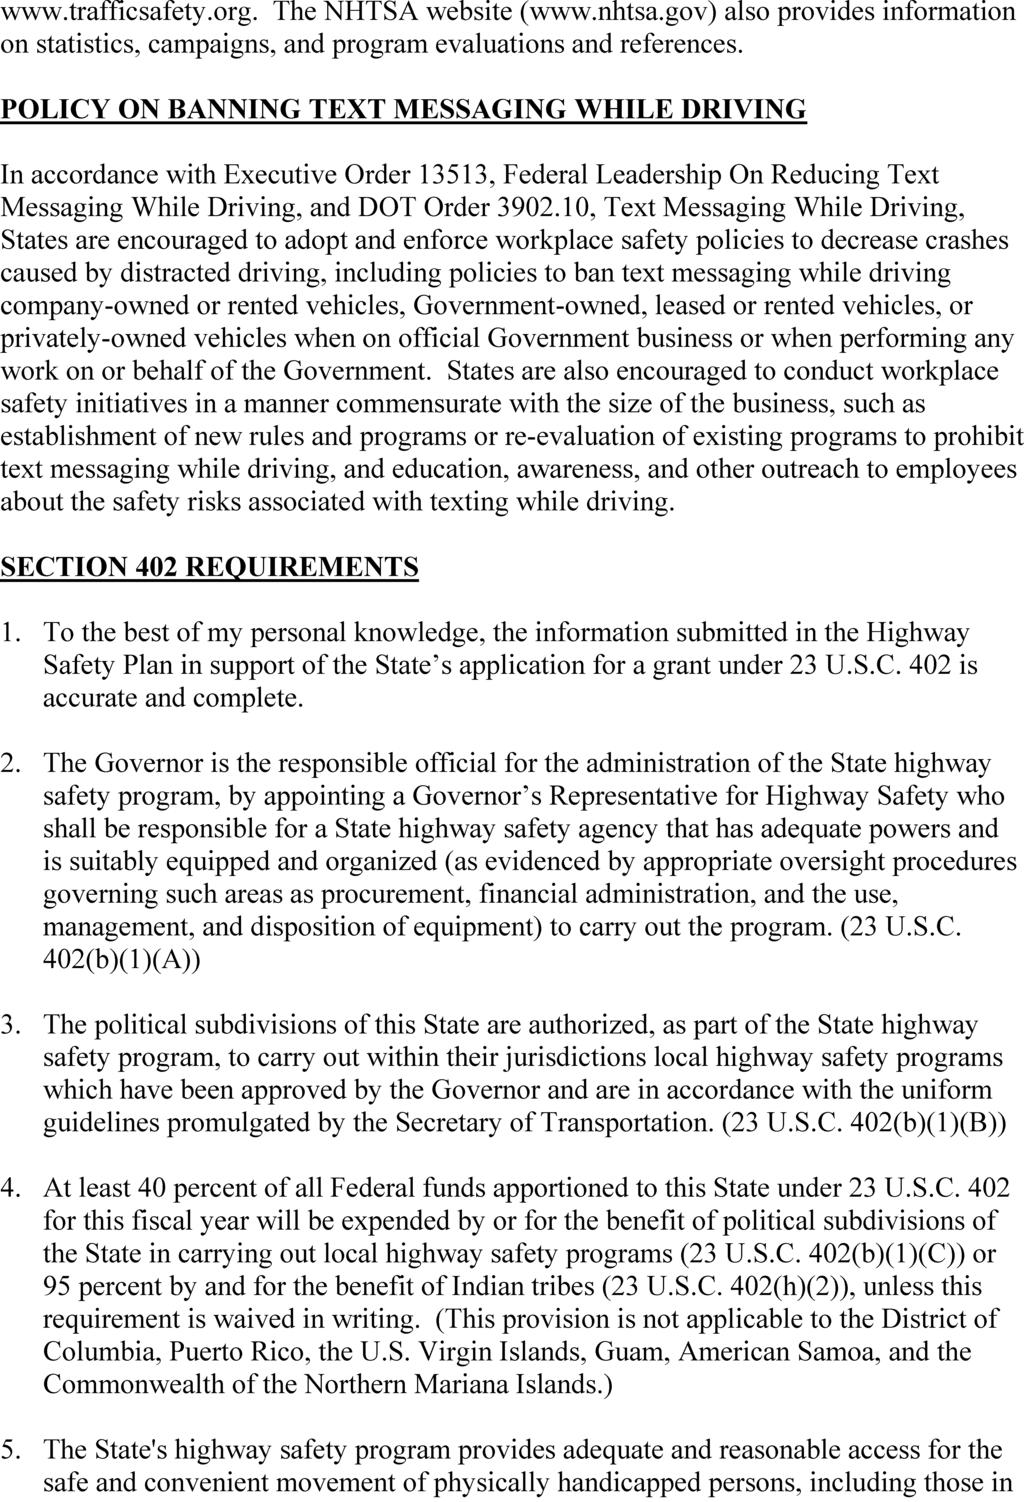 Federal Register / Vol. 83, No. 17 / Thursday, January 25, 2018 / Rules and Regulations 3509 www.trafficsafety.org. The NHTSA website (www.nhtsa.